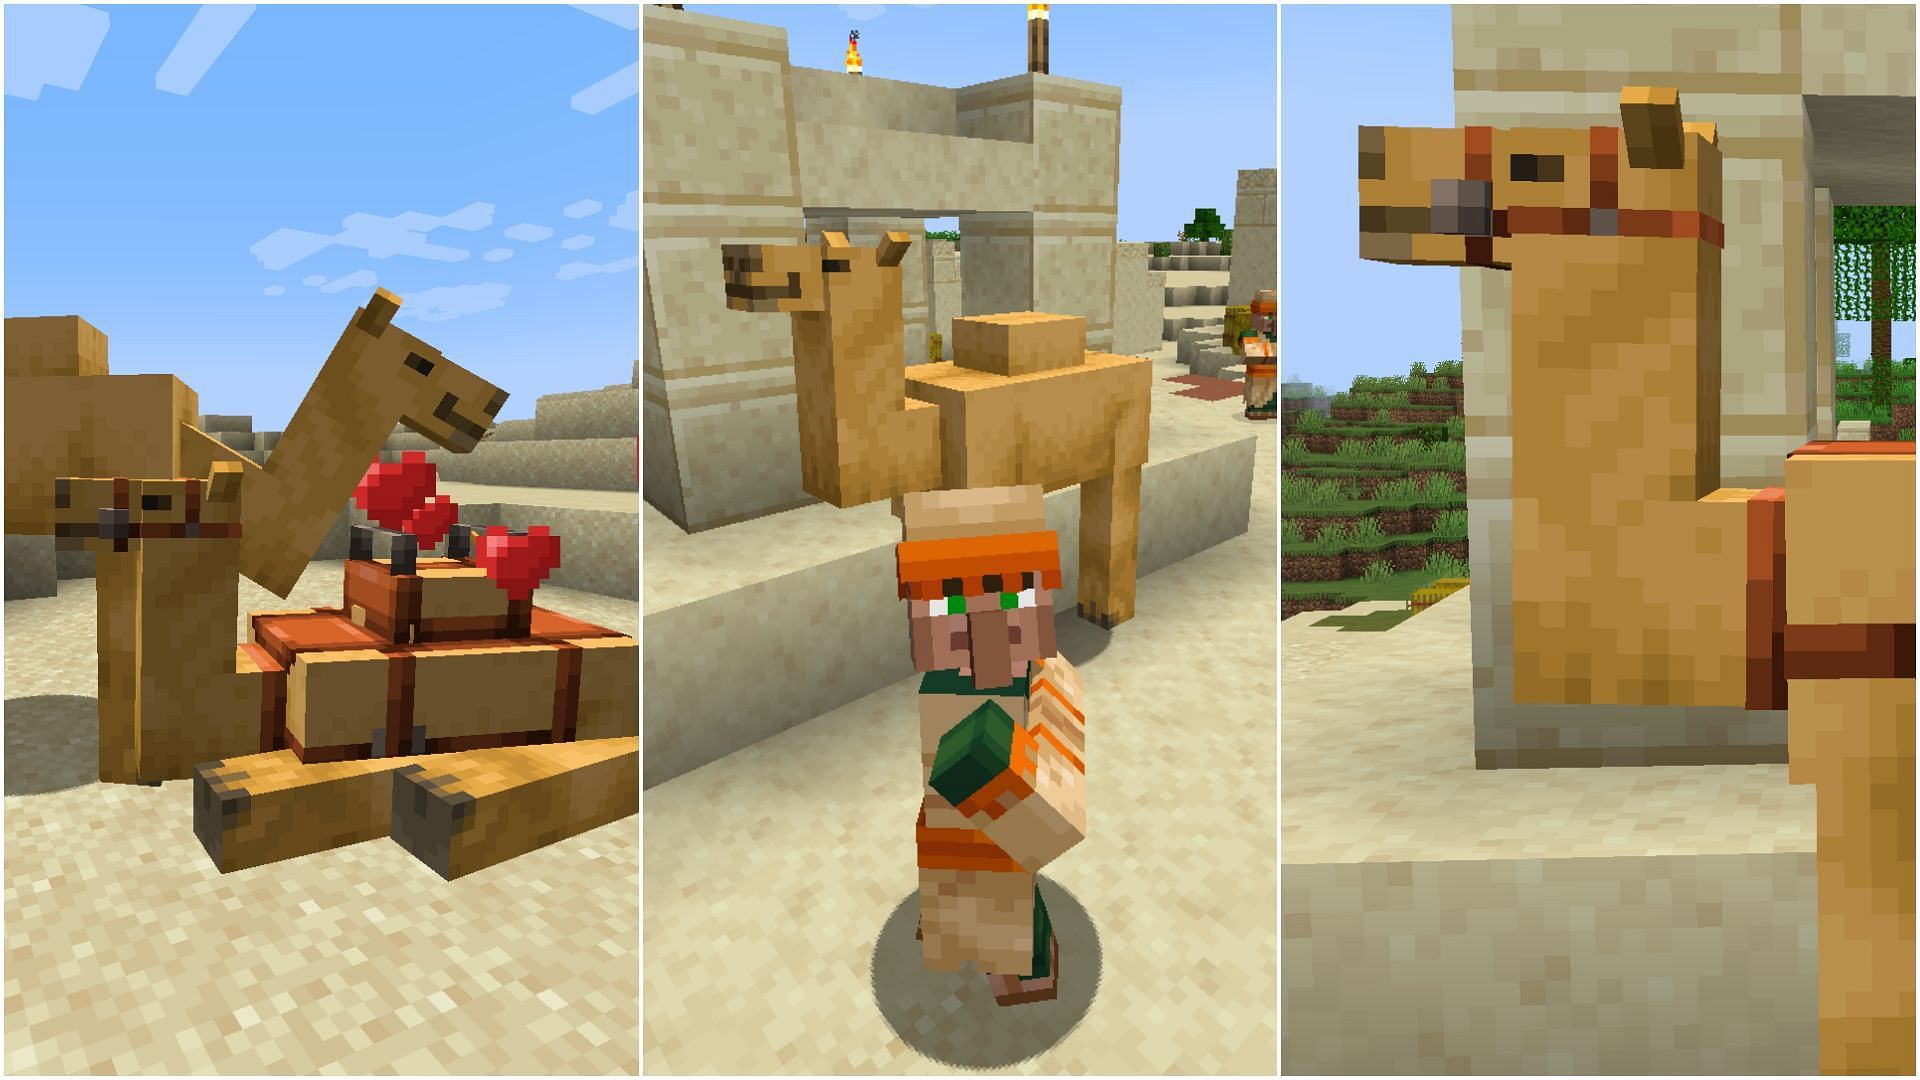 Camels are fascinating new mobs coming to Minecraft 1.20 update (Image via Sportskeeda)